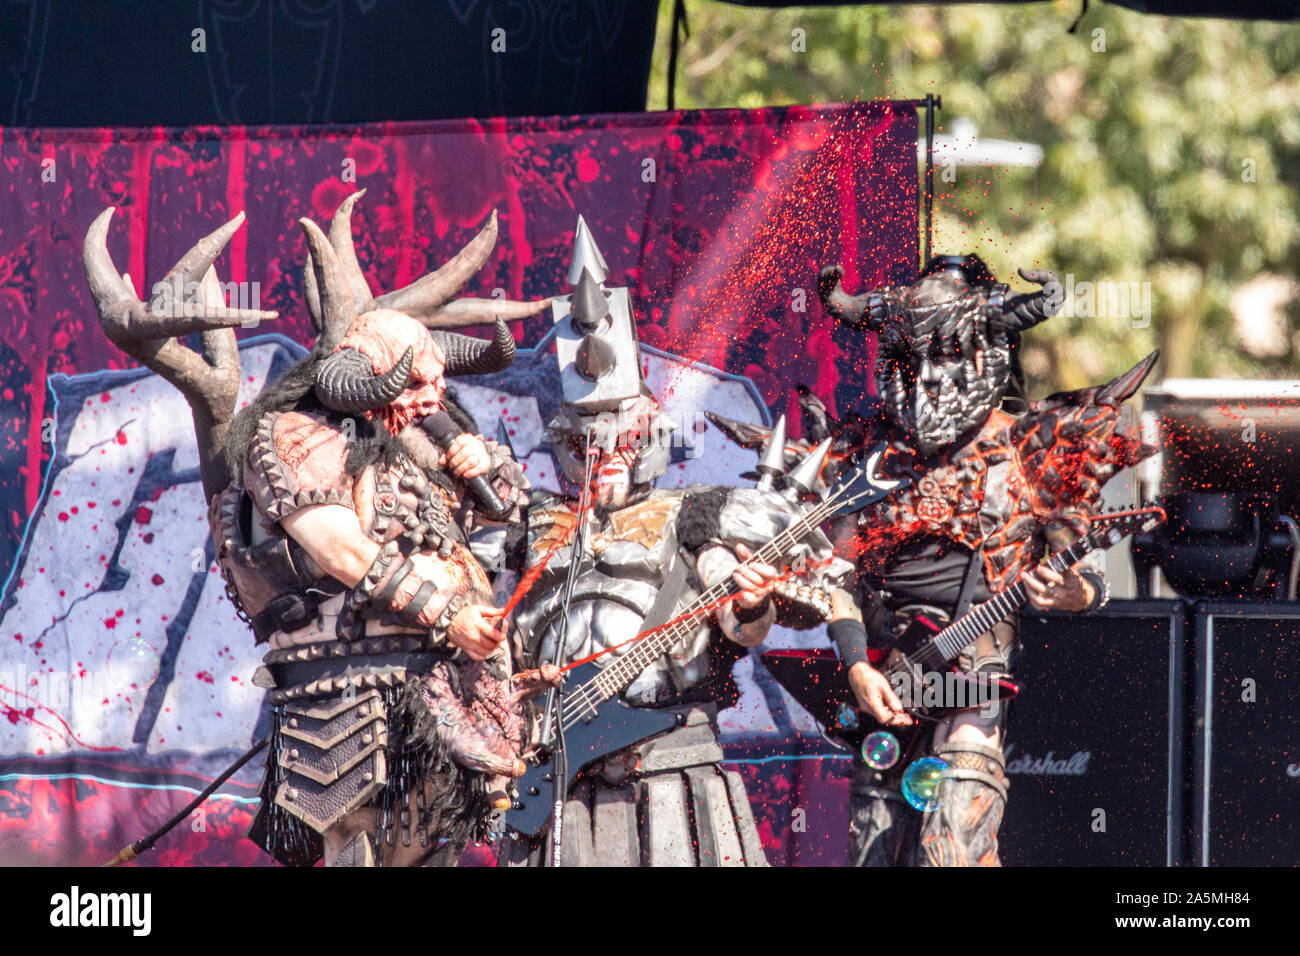 September 14, 2019, Chicago, Illinois, U.S: BLOTHAR (MICHAEL BISHOP), BEEFCAKE THE MIGHTY (CASEY ORR) and BALSAC THE JAWS OF DEATH (MIKE DERKS) of Gwar during the Riot Fest Music Festival at Douglas Park in Chicago, Illinois (Credit Image: © Daniel DeSlover/ZUMA Wire) Stock Photo